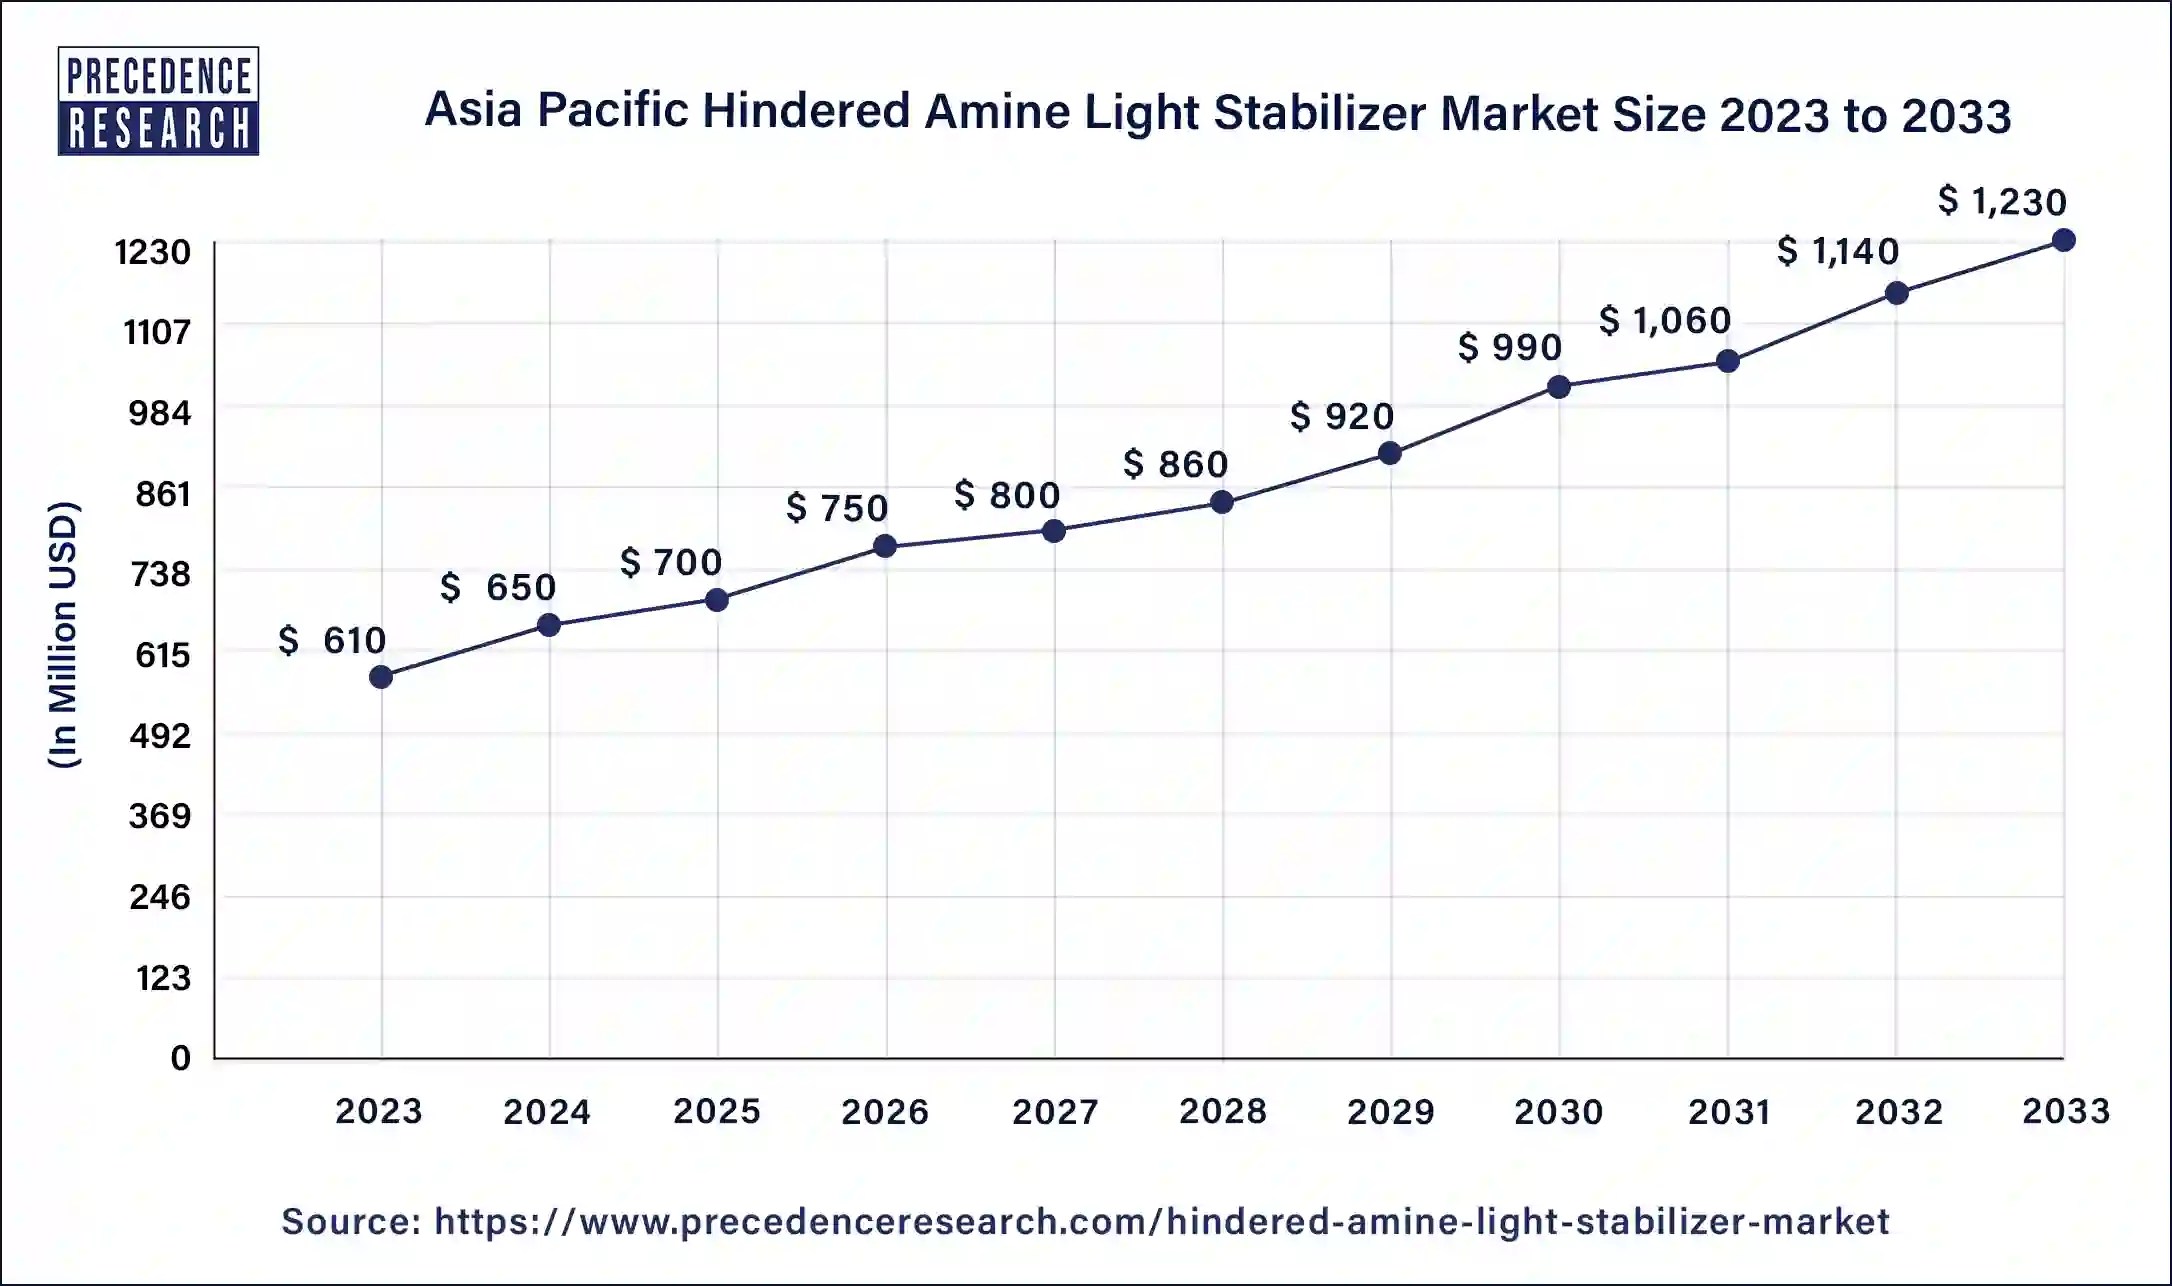 Asia Pacific Hindered Amine Light Stabilizer Market Size 2024 to 2033